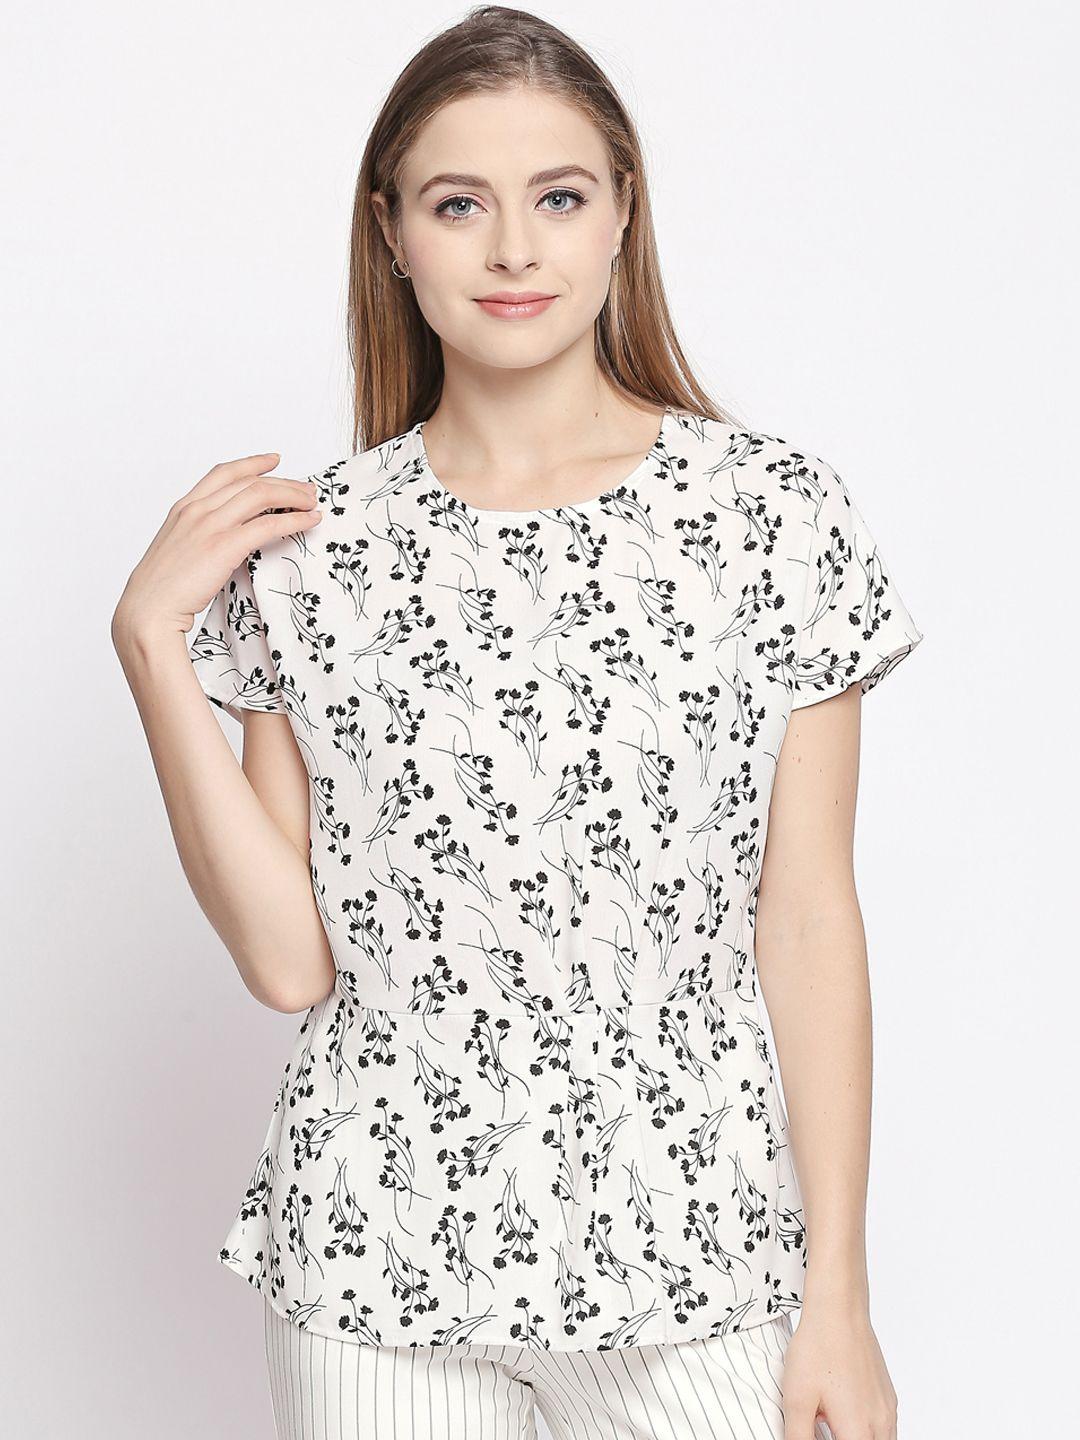 annabelle by pantaloons women white & black floral printed top